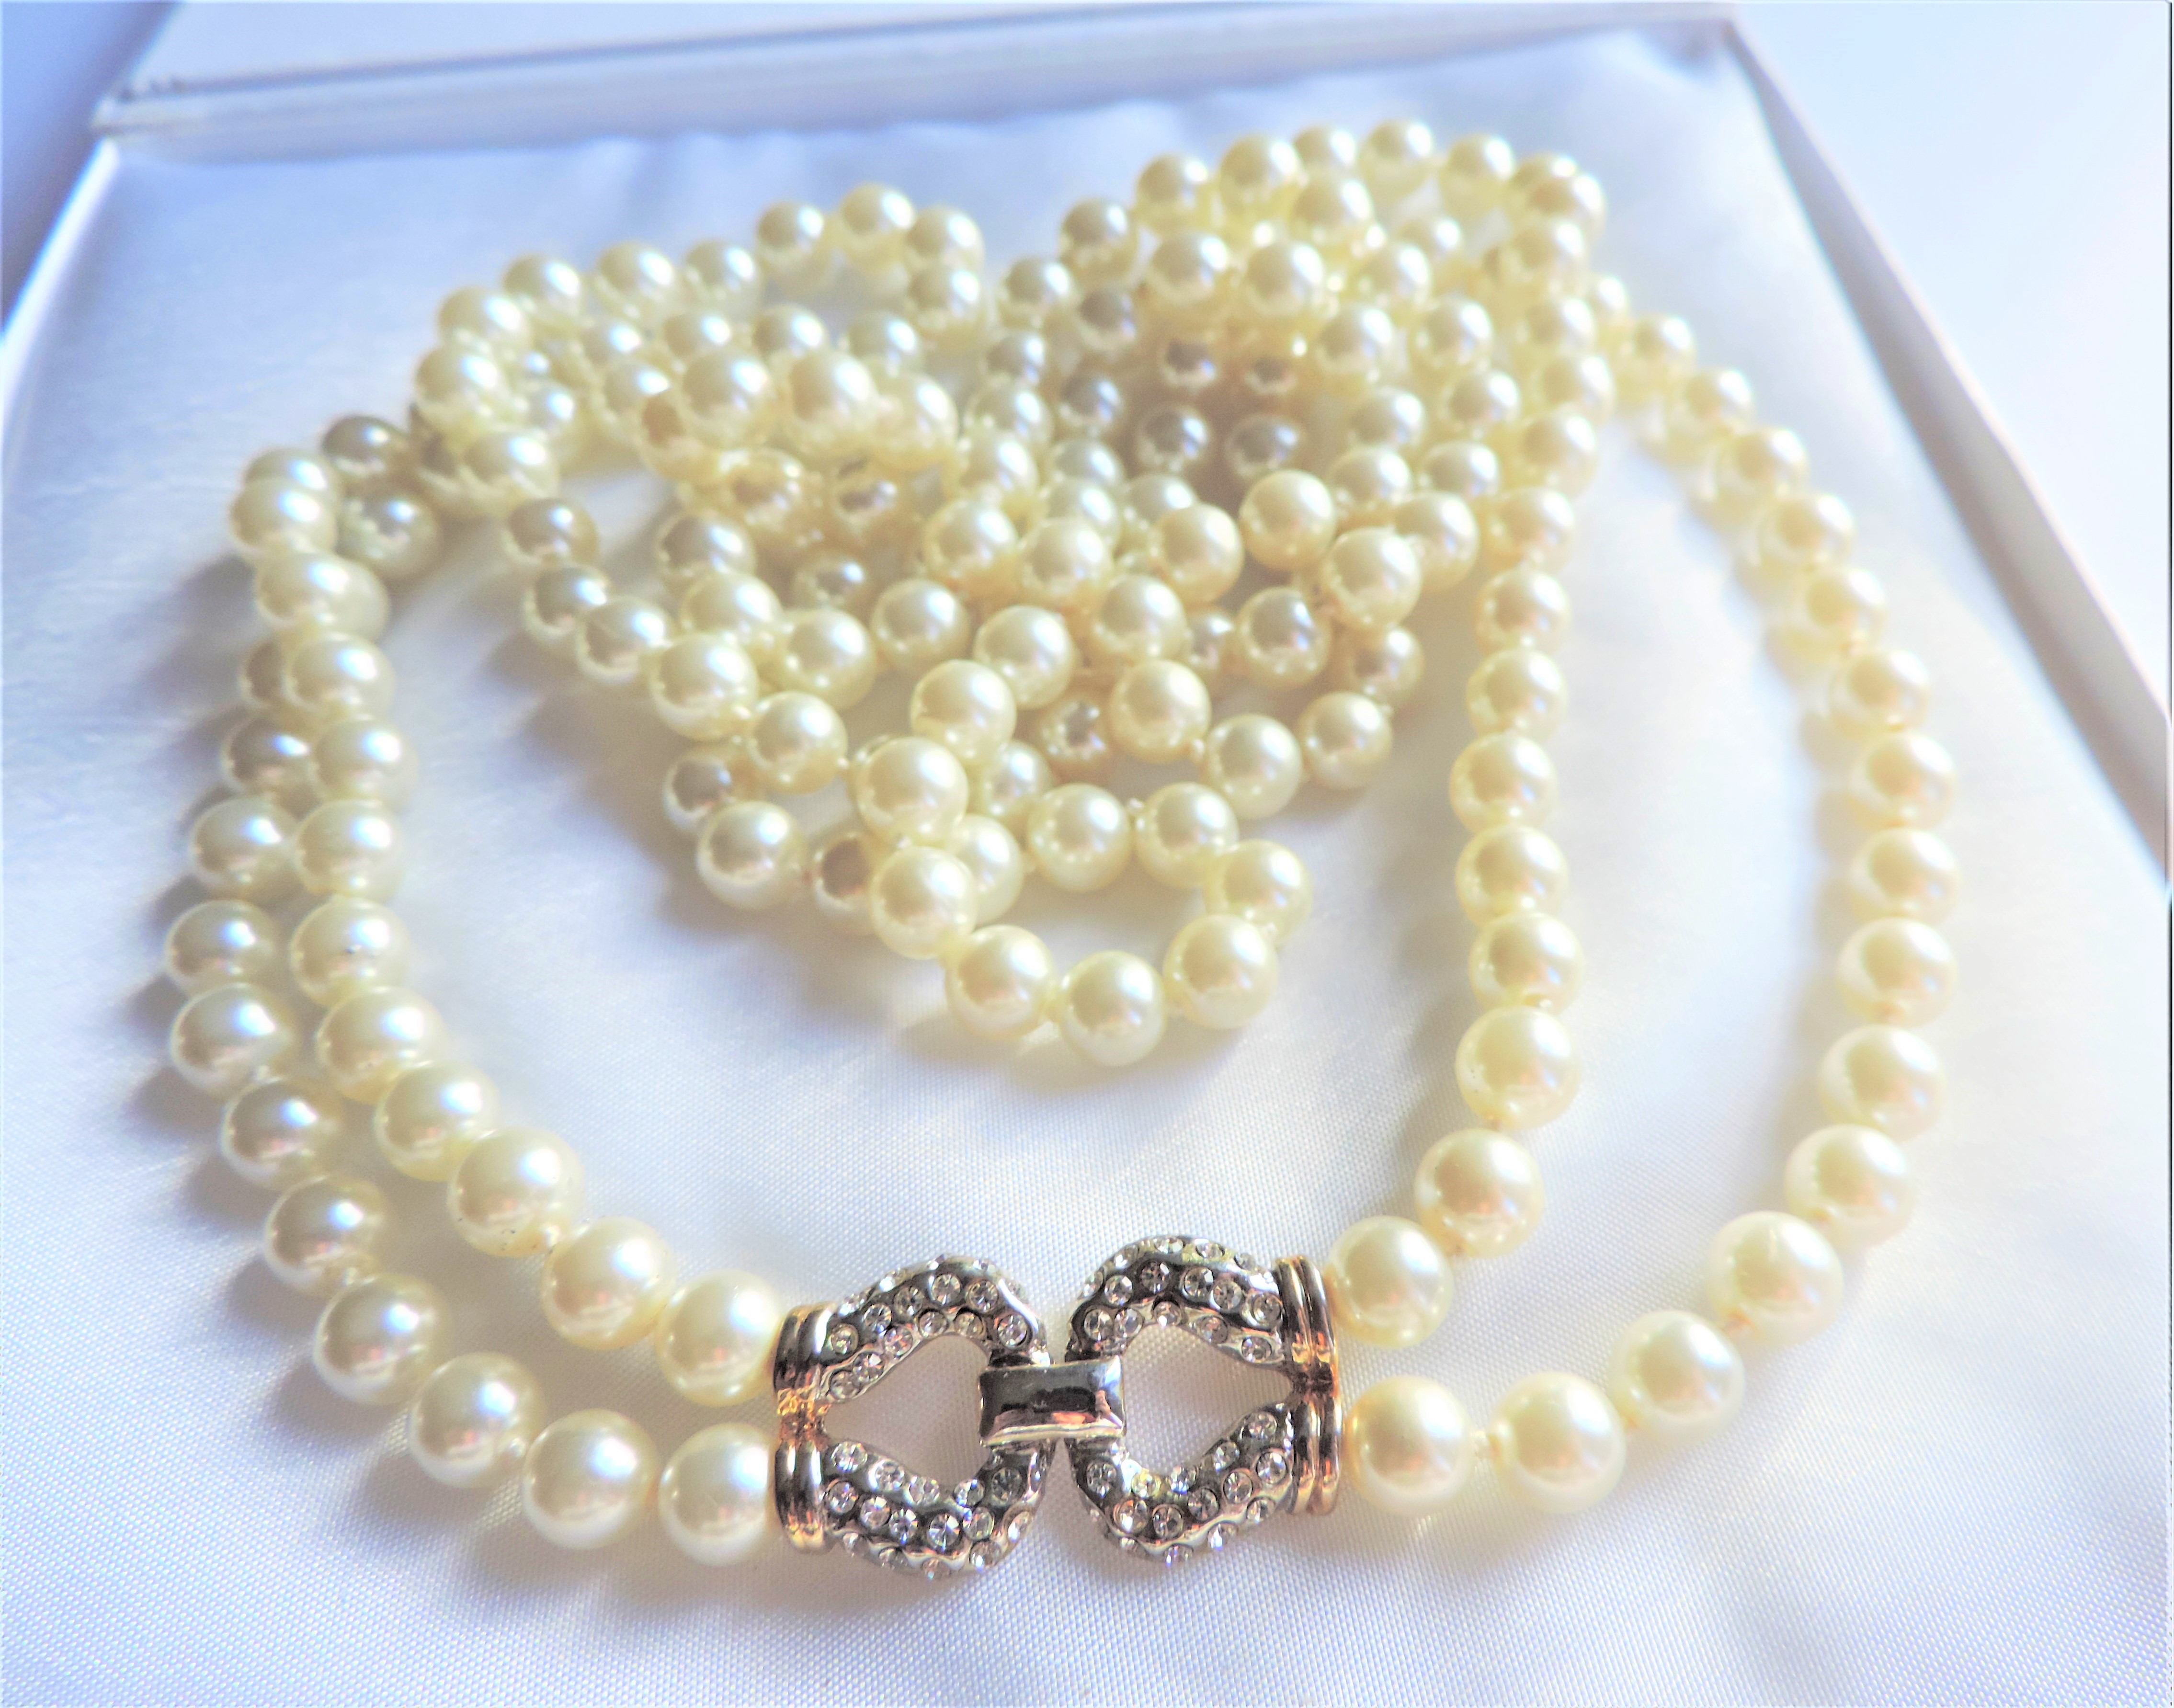 26 Inch Double Strand Pearl Necklace 7mm Size Pearls - Image 2 of 5